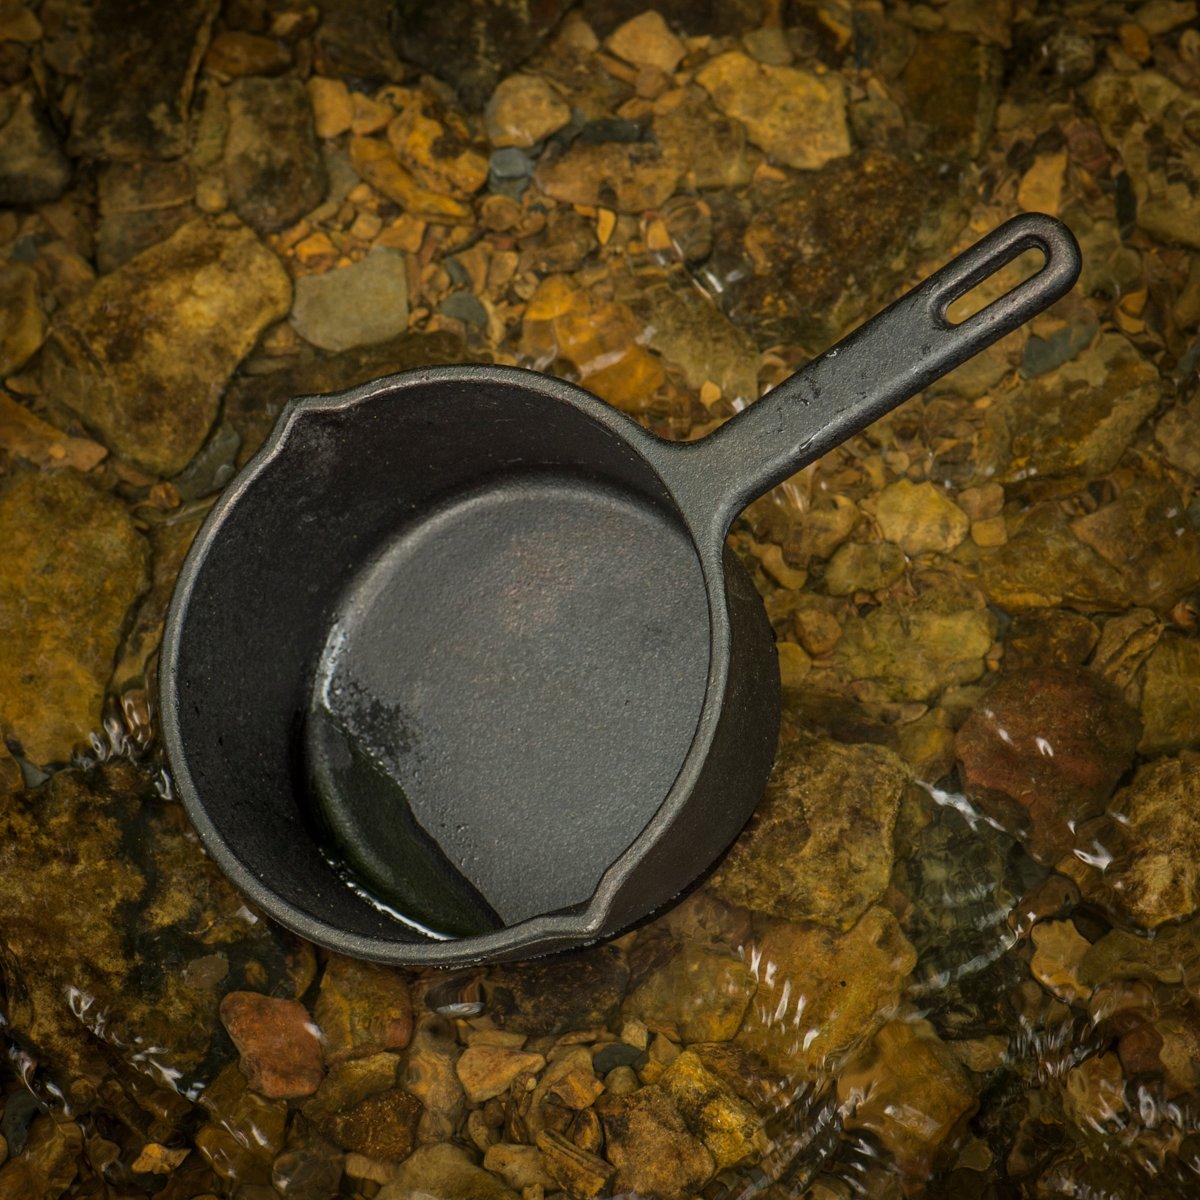 A small sauce pan is perfect for heating your sauce or glaze on the grill. Photo B. Konway